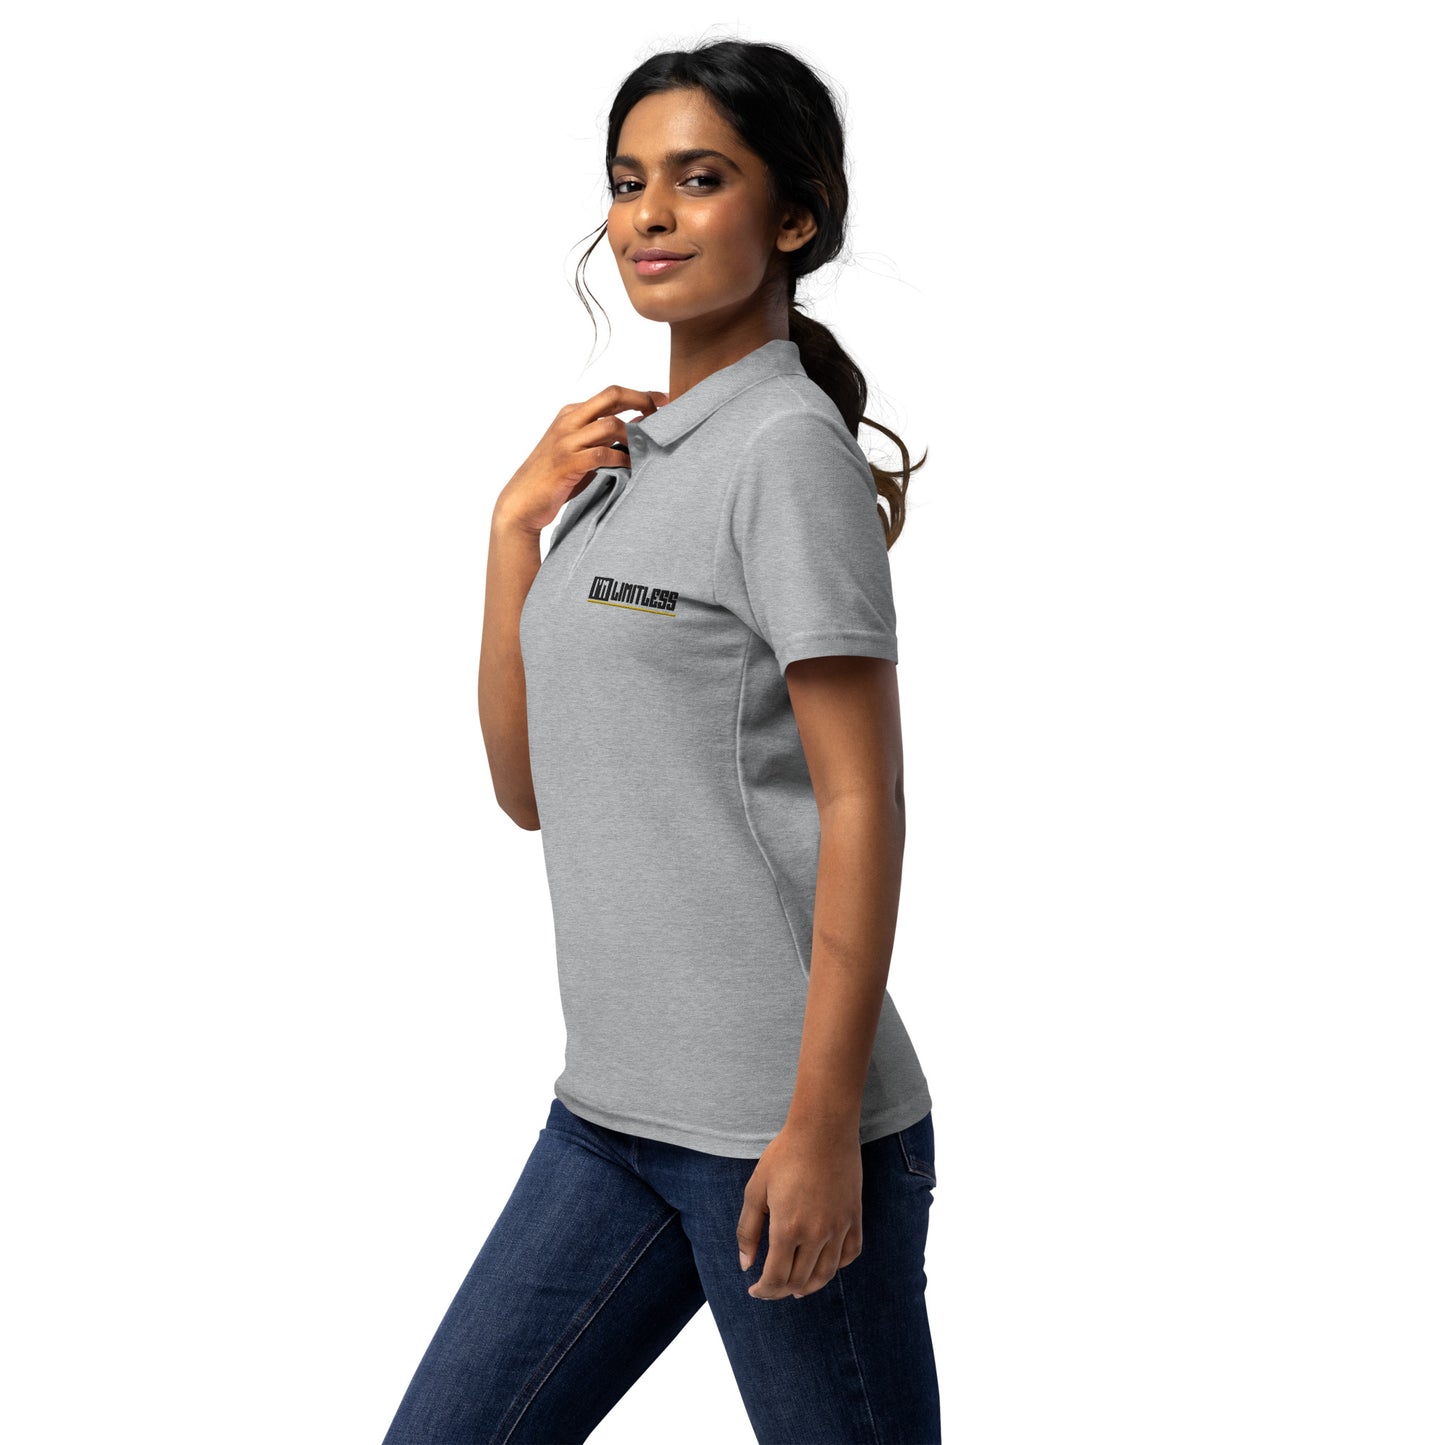 Limitless Woman's Pique Polo Shirt - Breathable & Durable | Your Fashion Statement